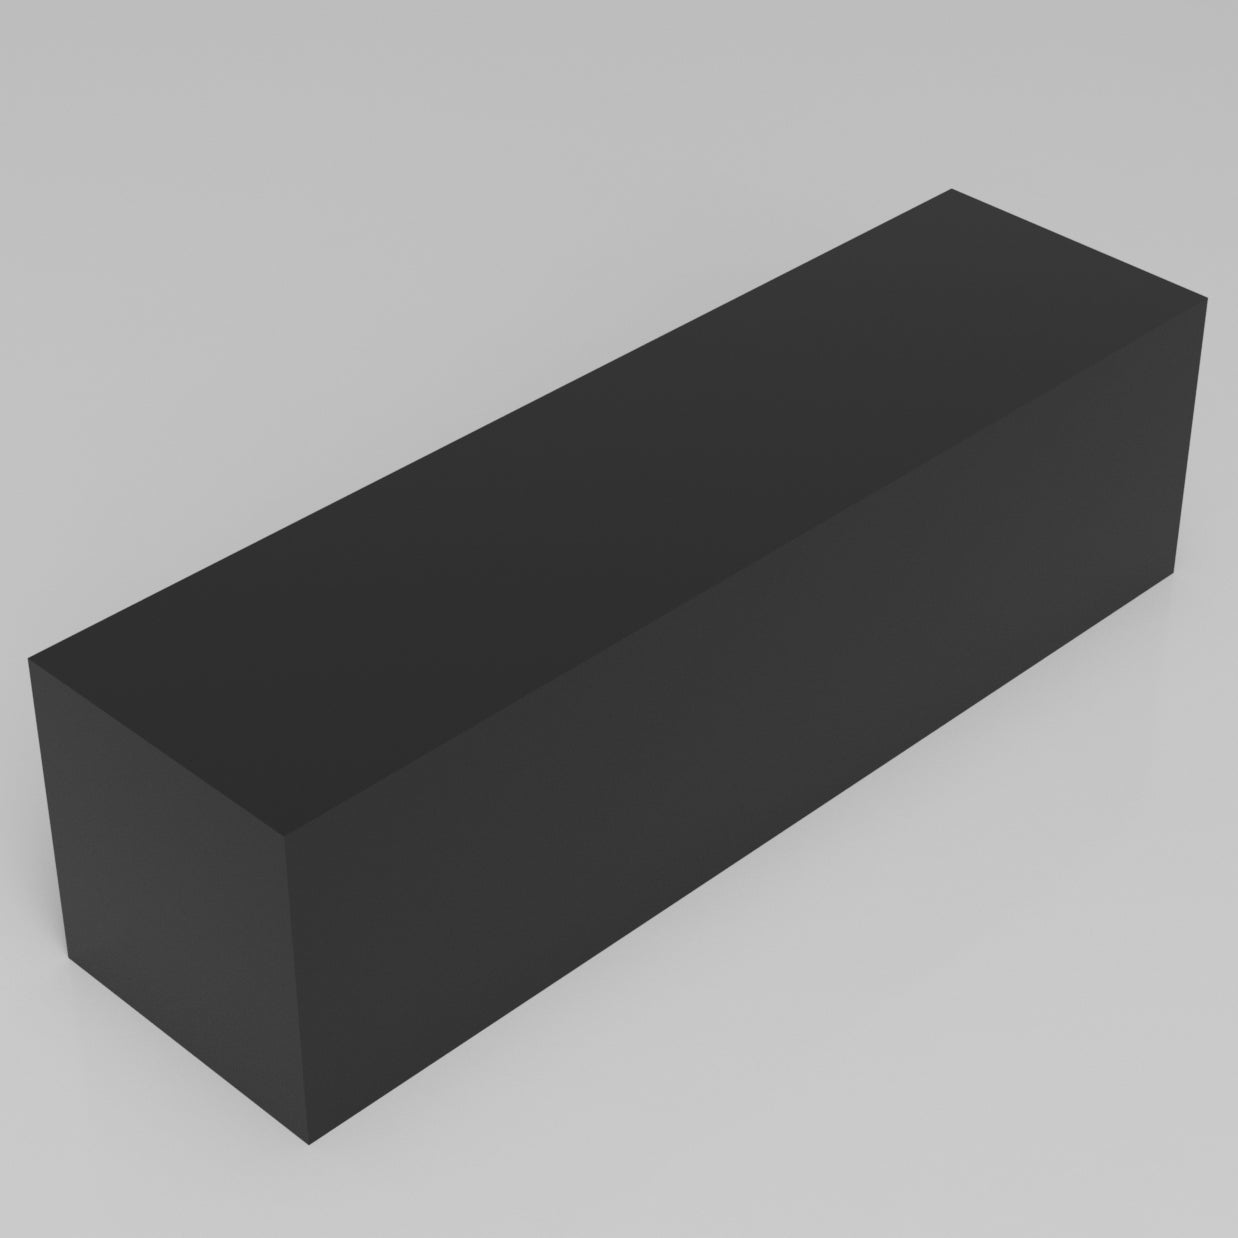 Machinable Wax Rectangular Block Front View 5 Inch by 5 Inch by 18 Inch